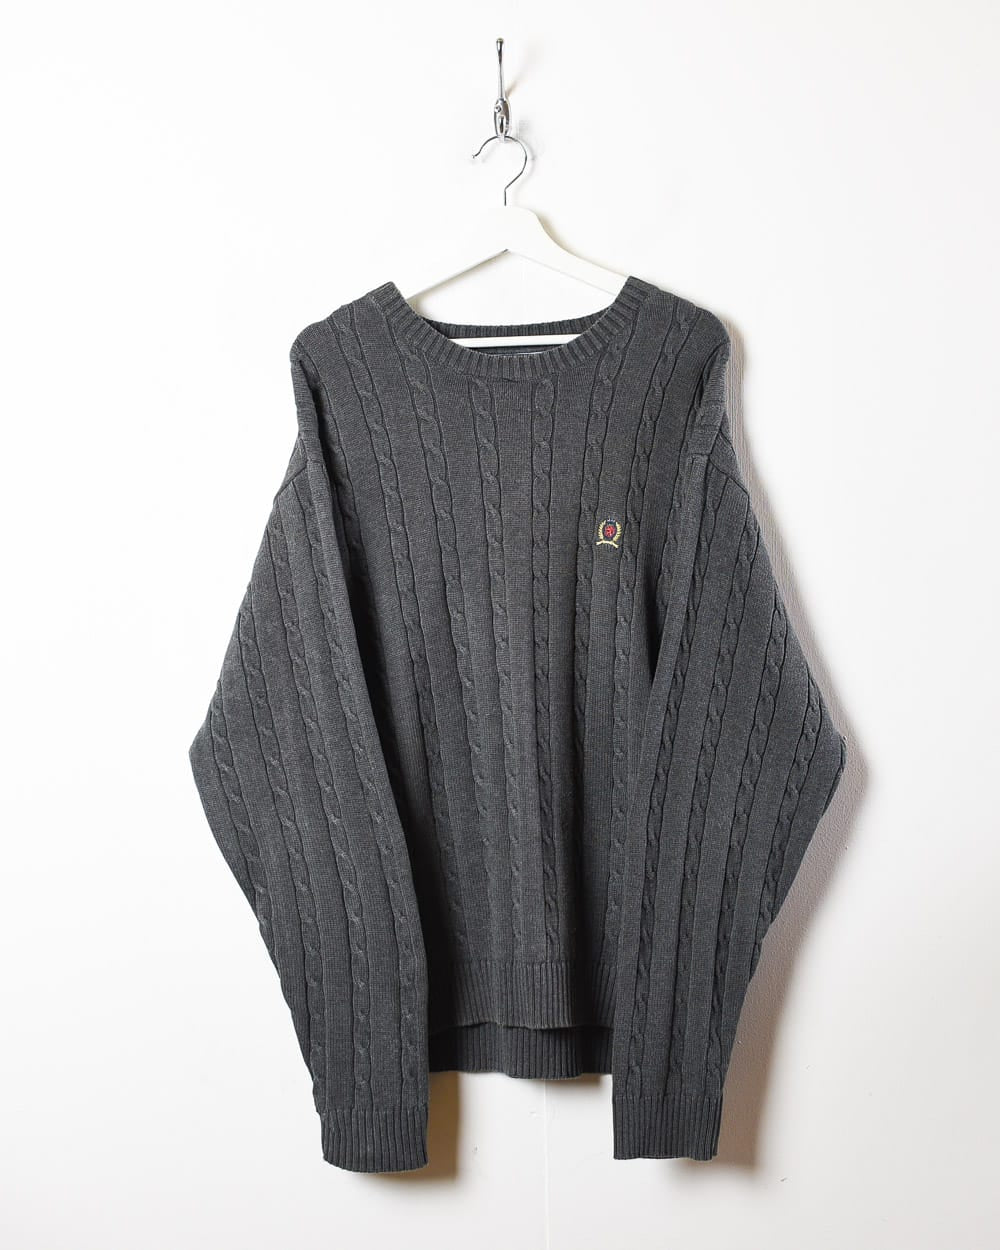 Grey Tommy Hilfiger Cable Knitted Sweatshirt - X-Large